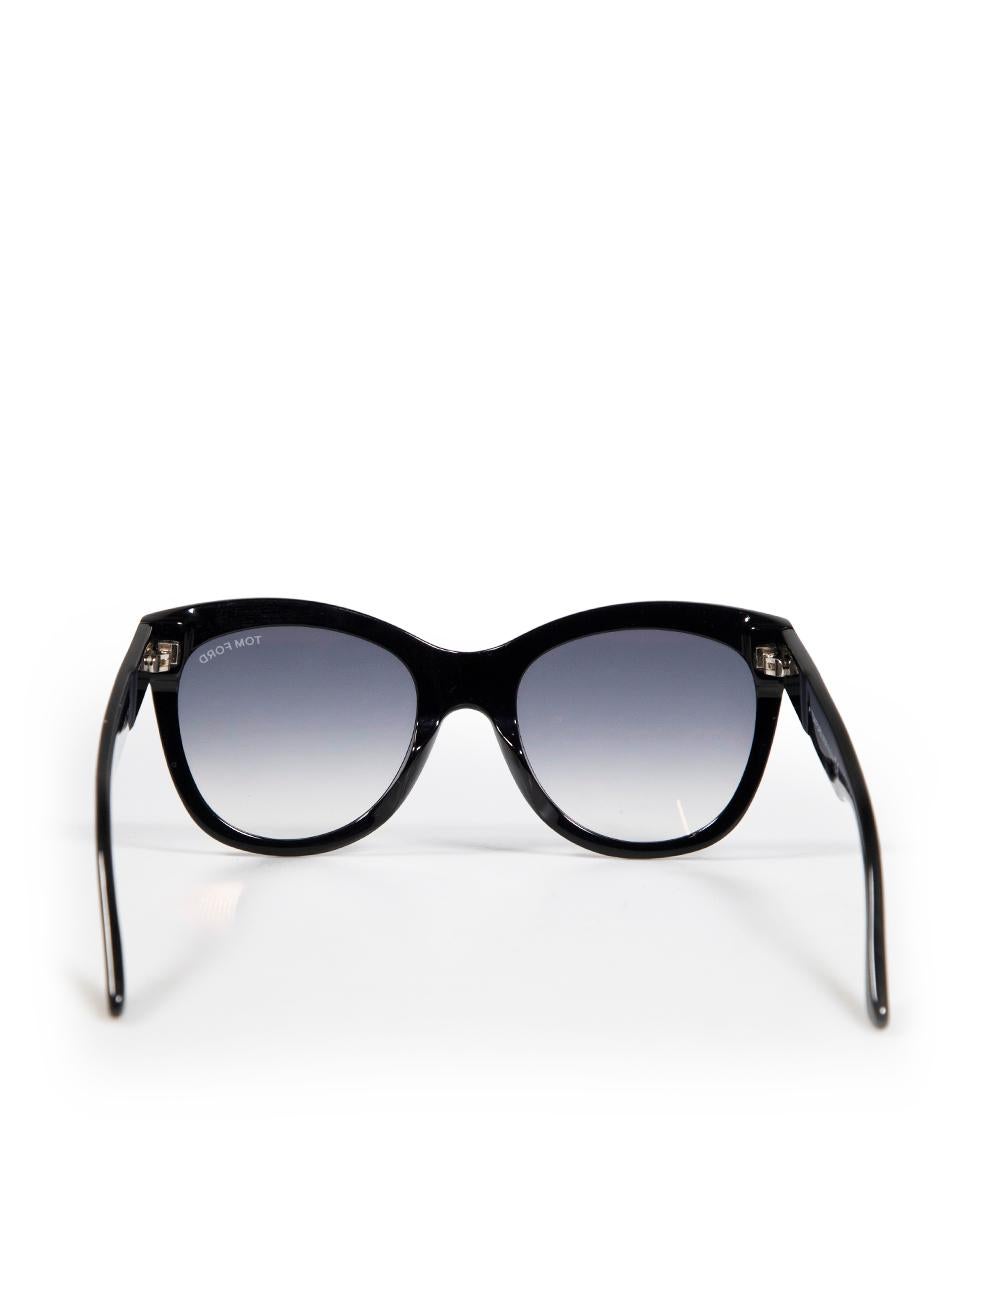 Tom Ford Black Wallace Round Sunglasses In Good Condition For Sale In London, GB